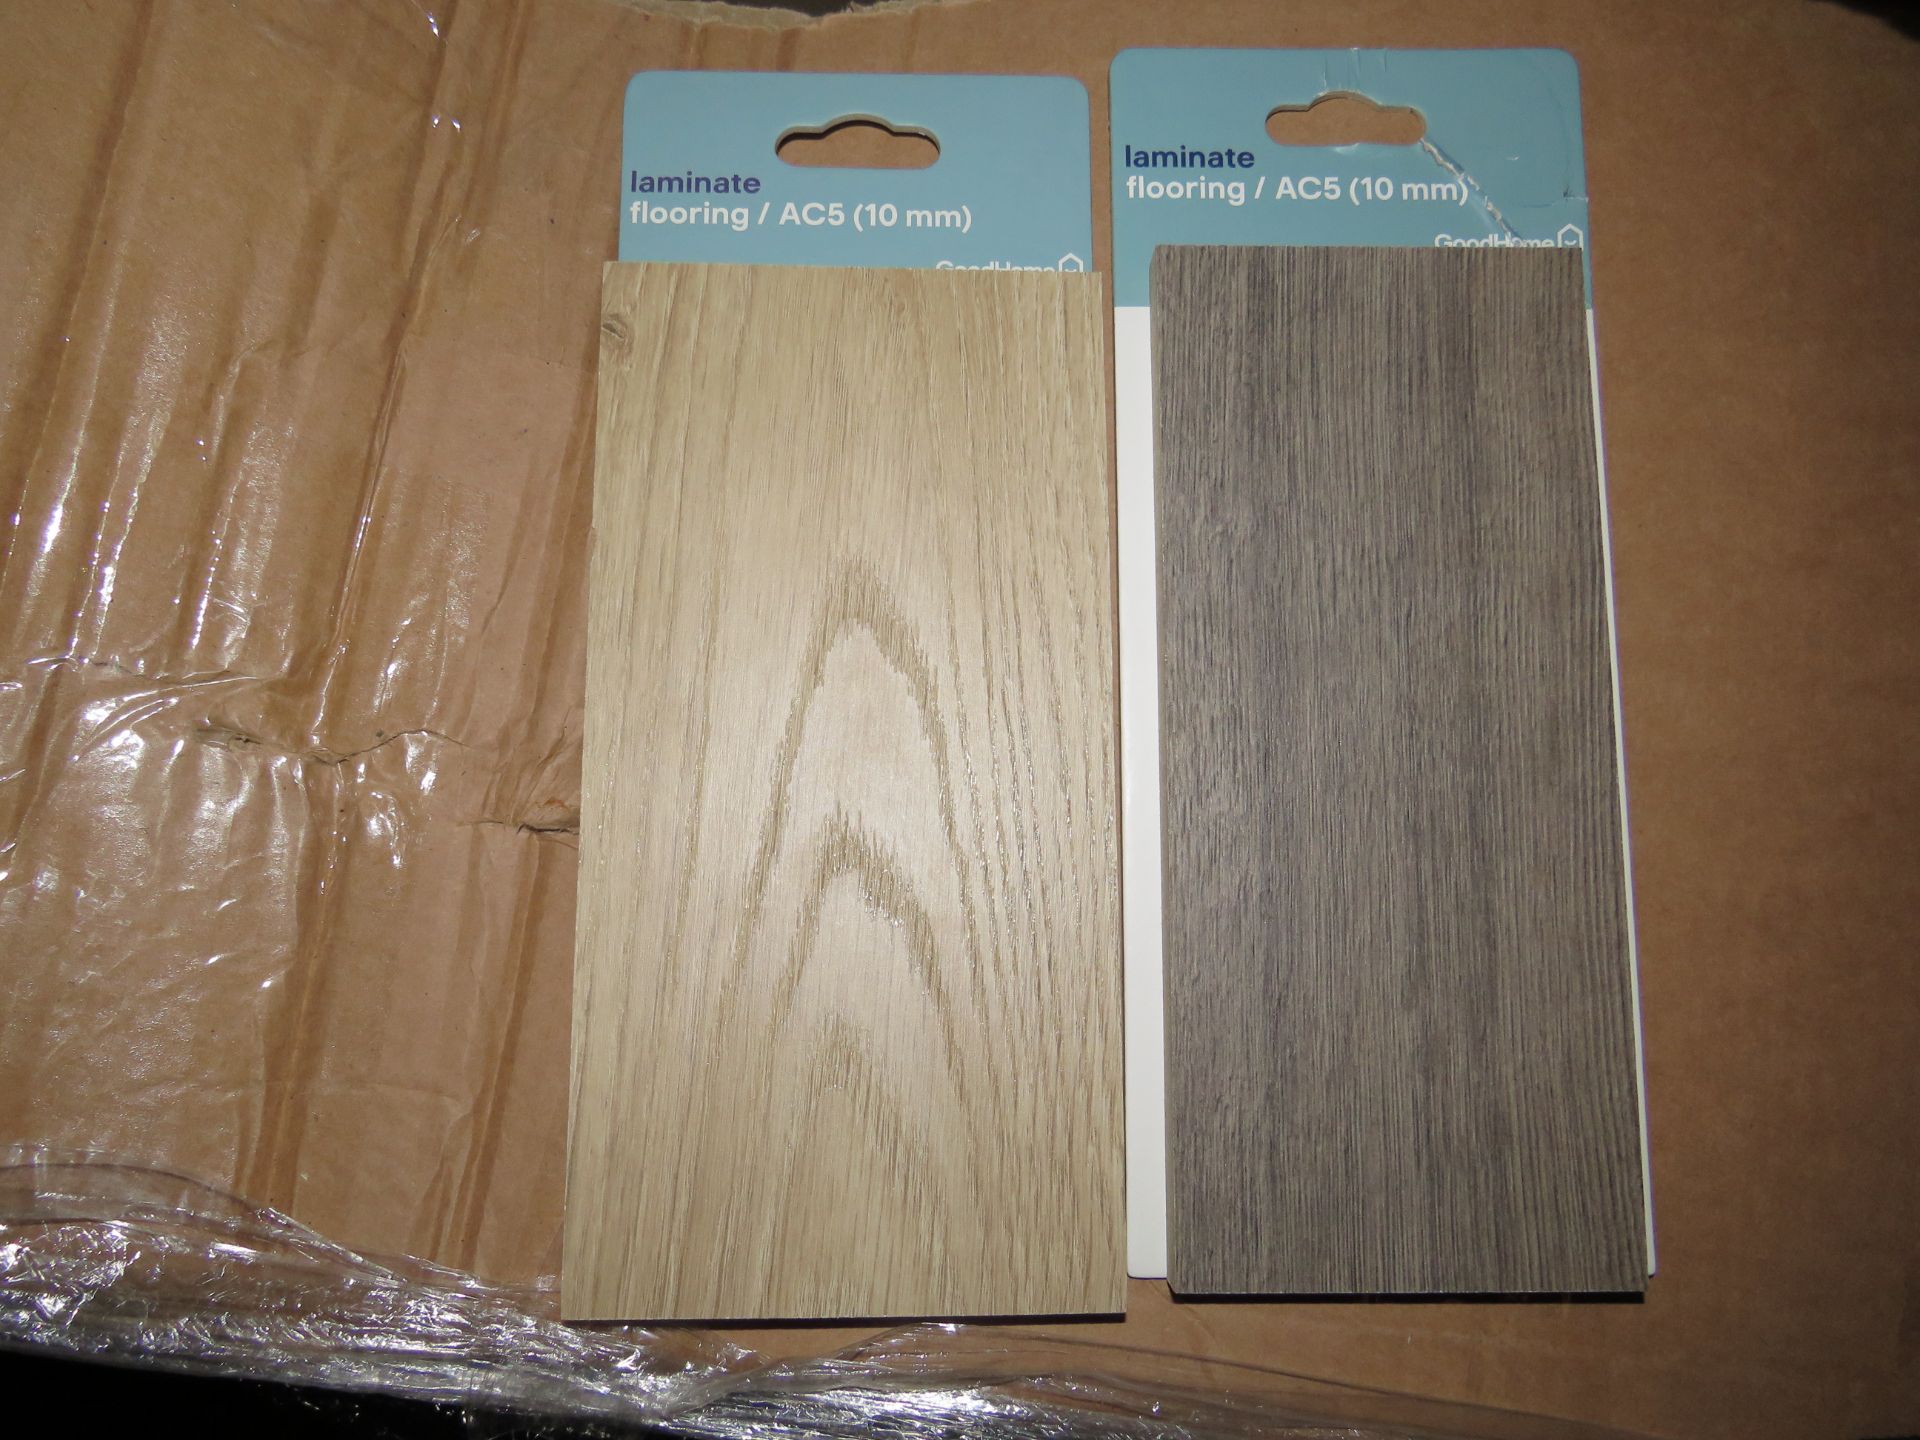 1X PALLET CONTAINING APPROX 800 : LAMINATE FLOORING SAMPLES - Samples Are Assorted and Completely - Image 2 of 2